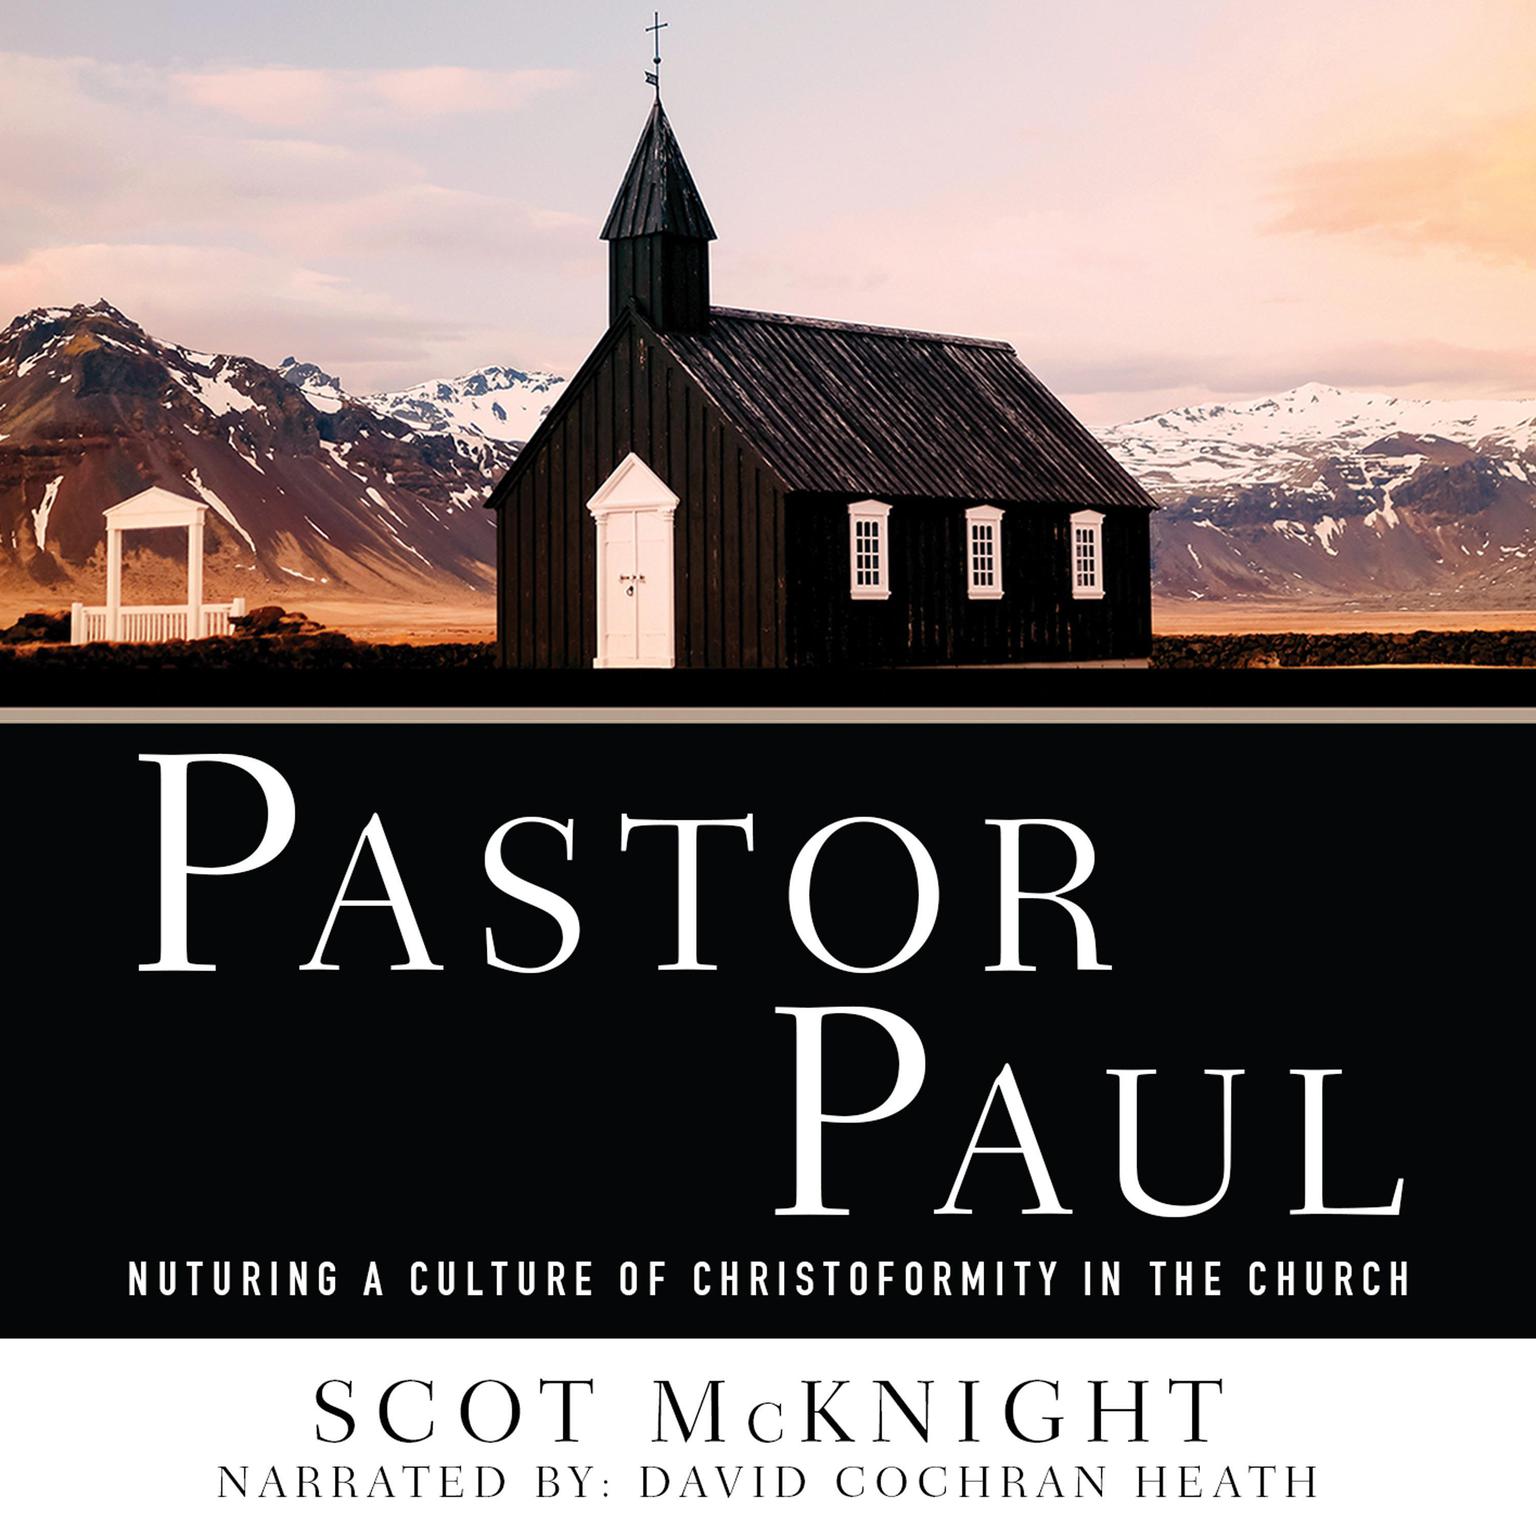 Pastor Paul: Nurturing a Culture of Christoformity in the Church Audiobook, by Scot McKnight